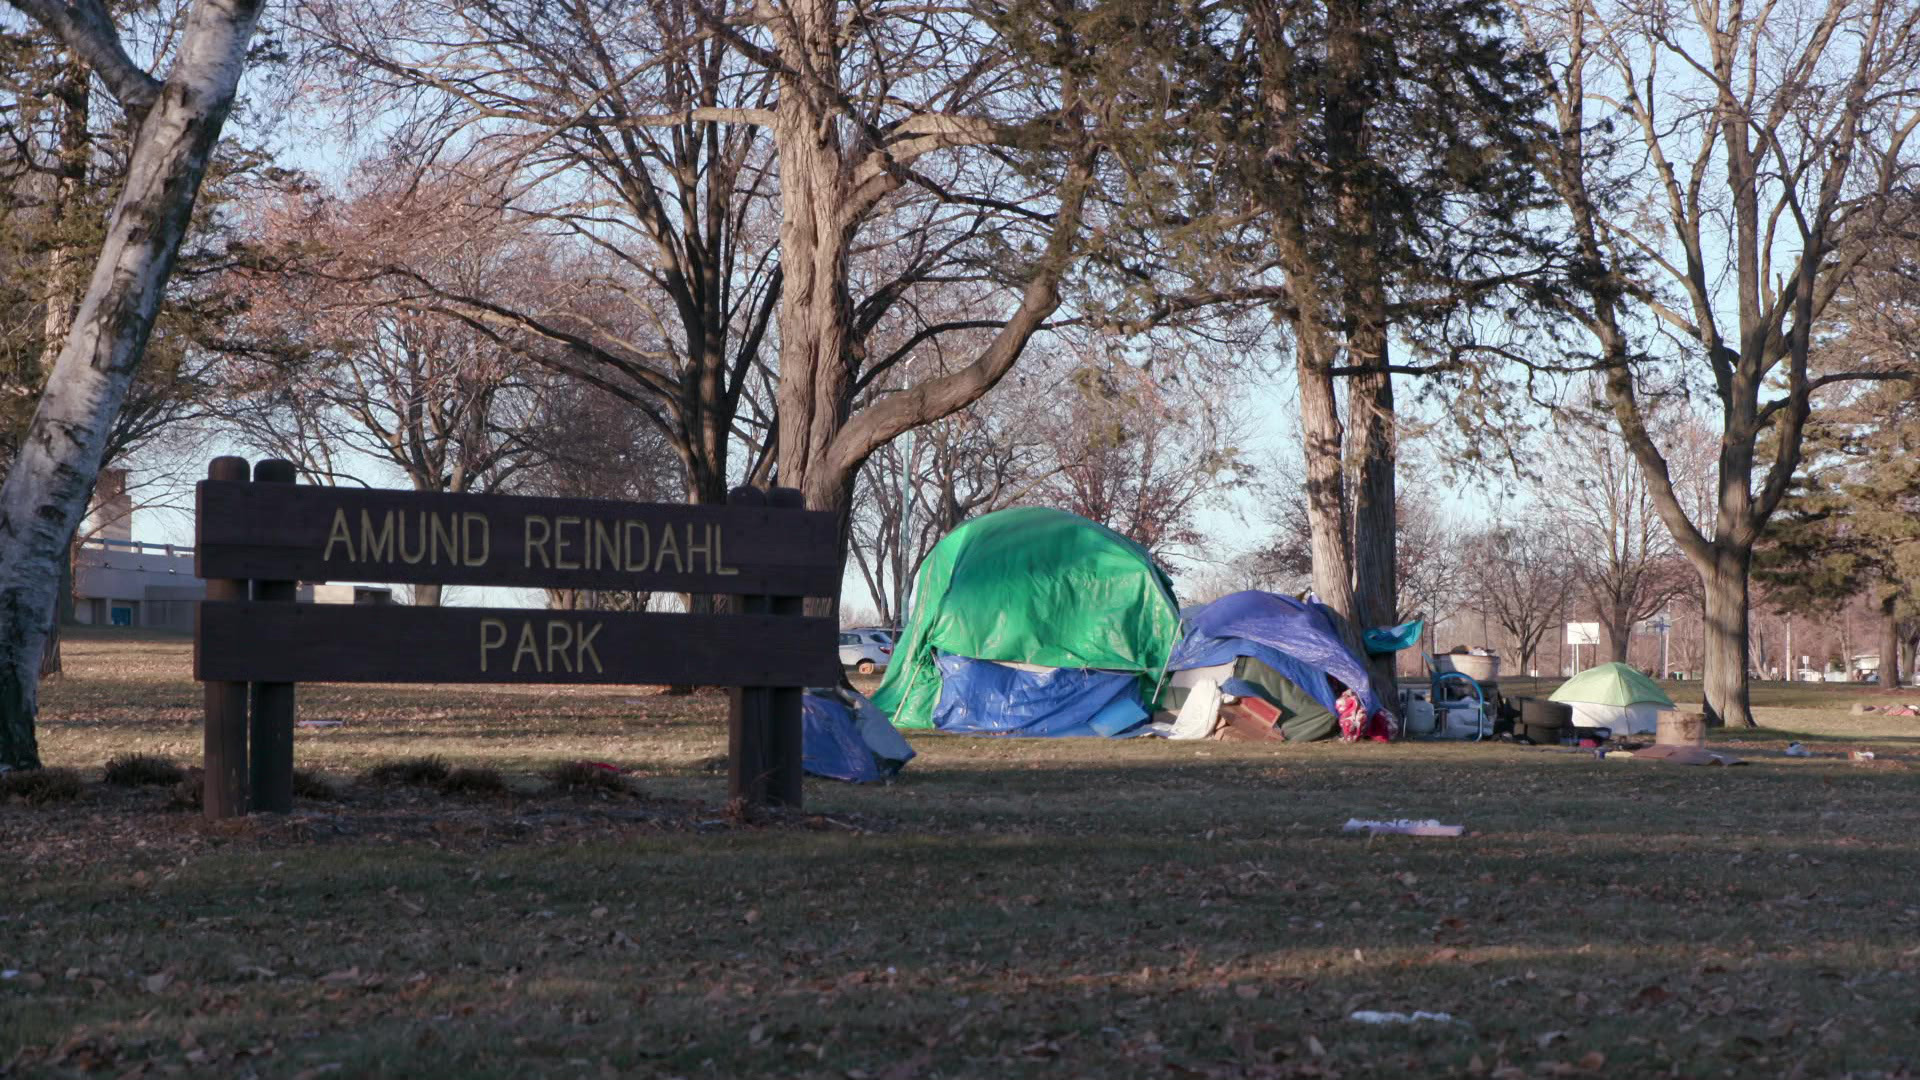 Several tents and surrounding baggage stand under trees and behind a sign reading "Amund Reindahl Park."